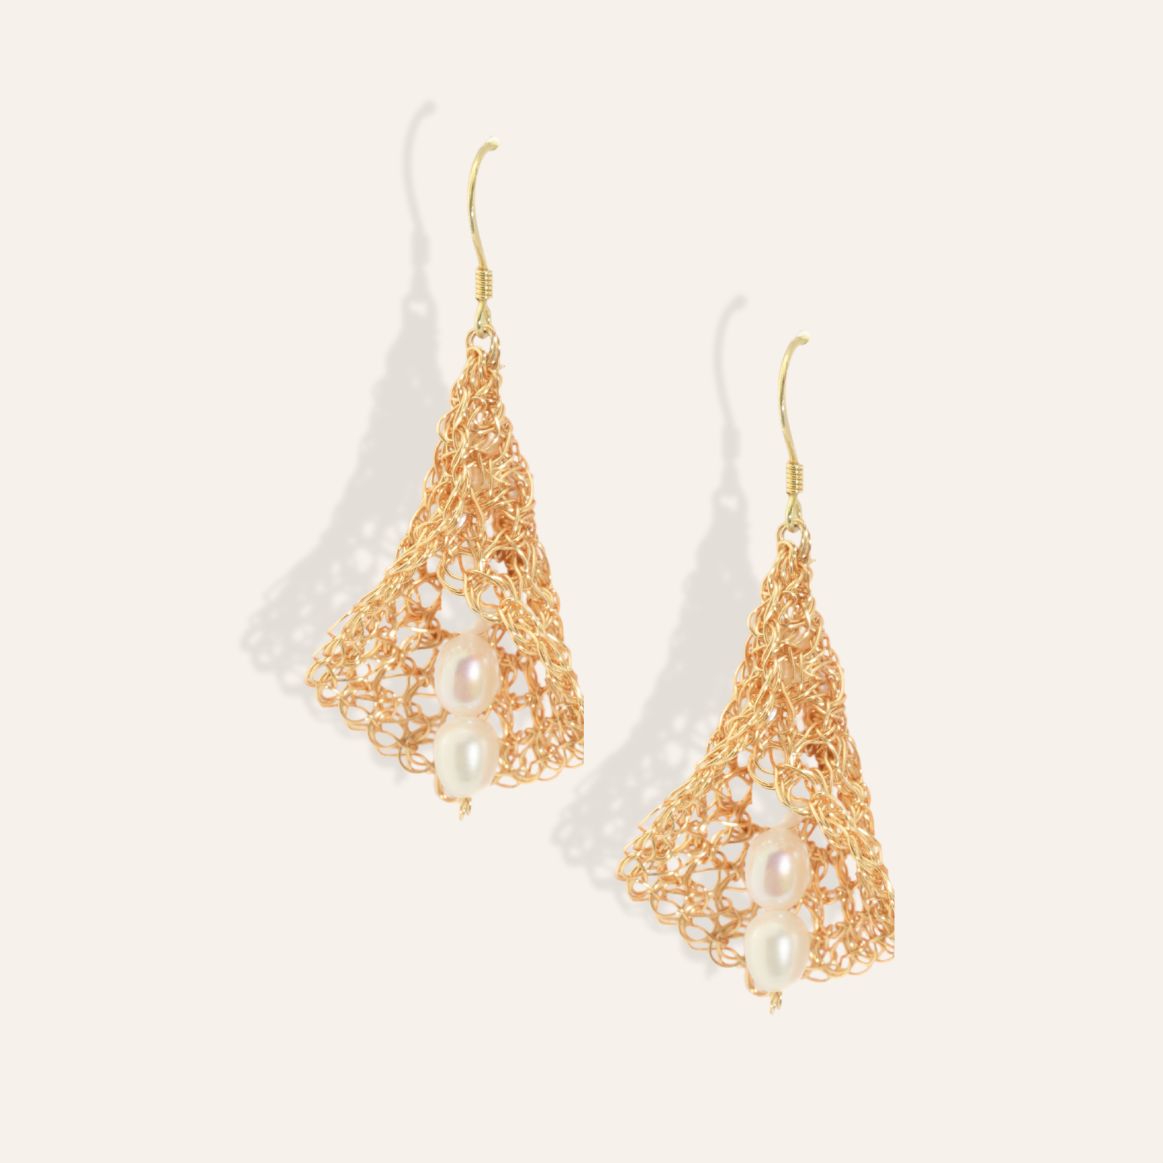 AURUME Hand-knitted Calla Lily Earrings